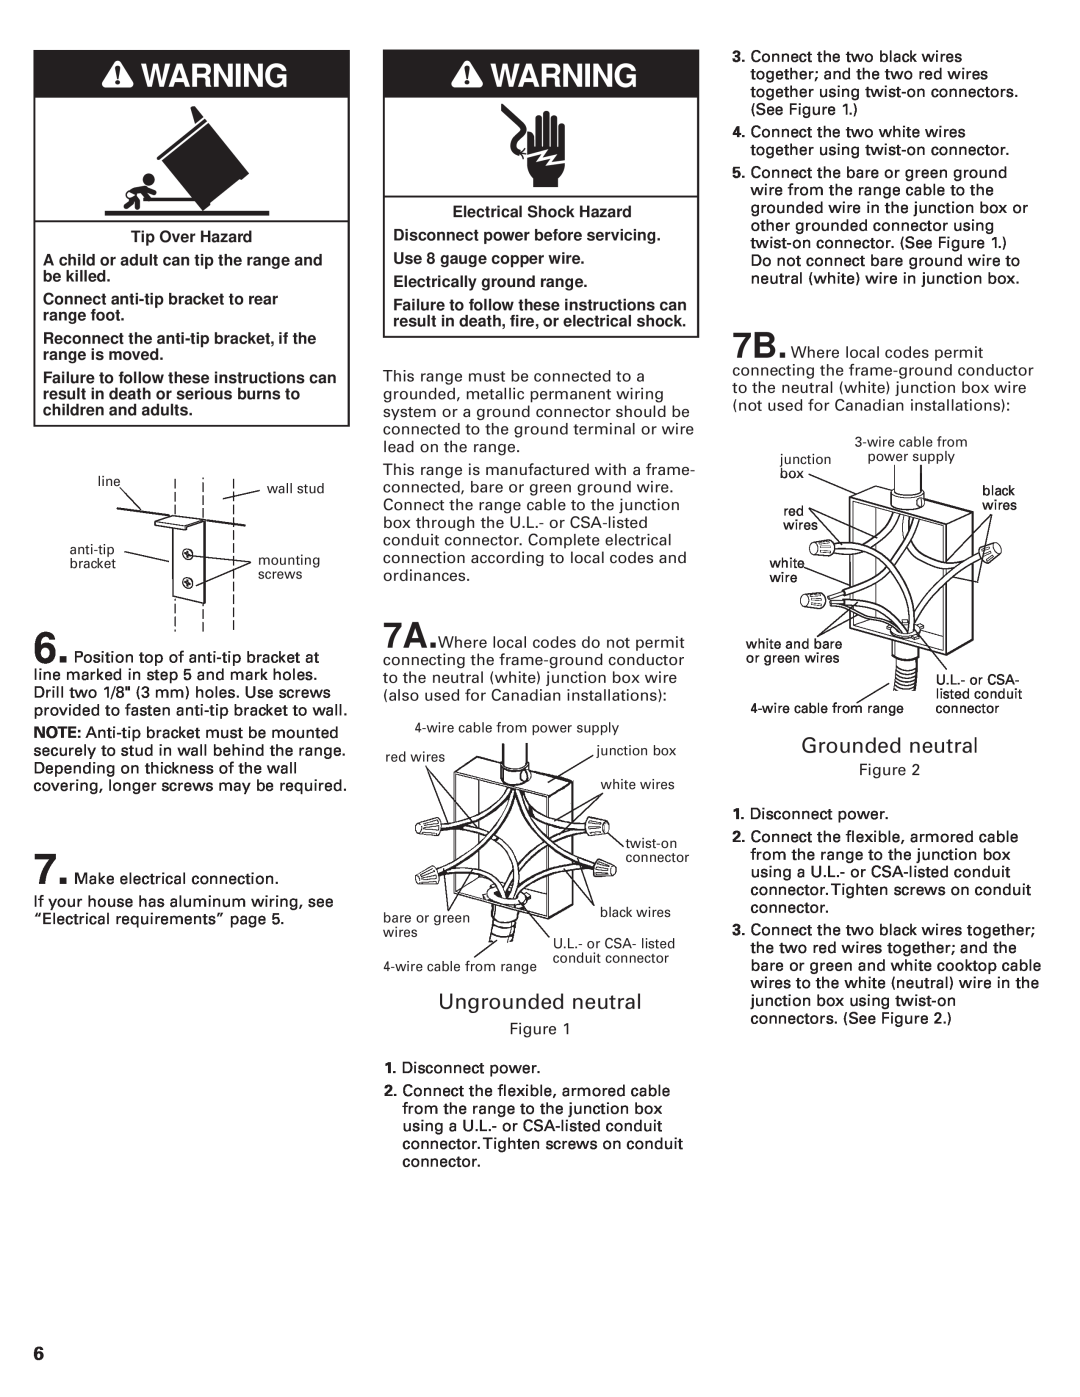 KitchenAid 8302472A installation instructions Warning Warning, Grounded neutral, Ungrounded neutral 